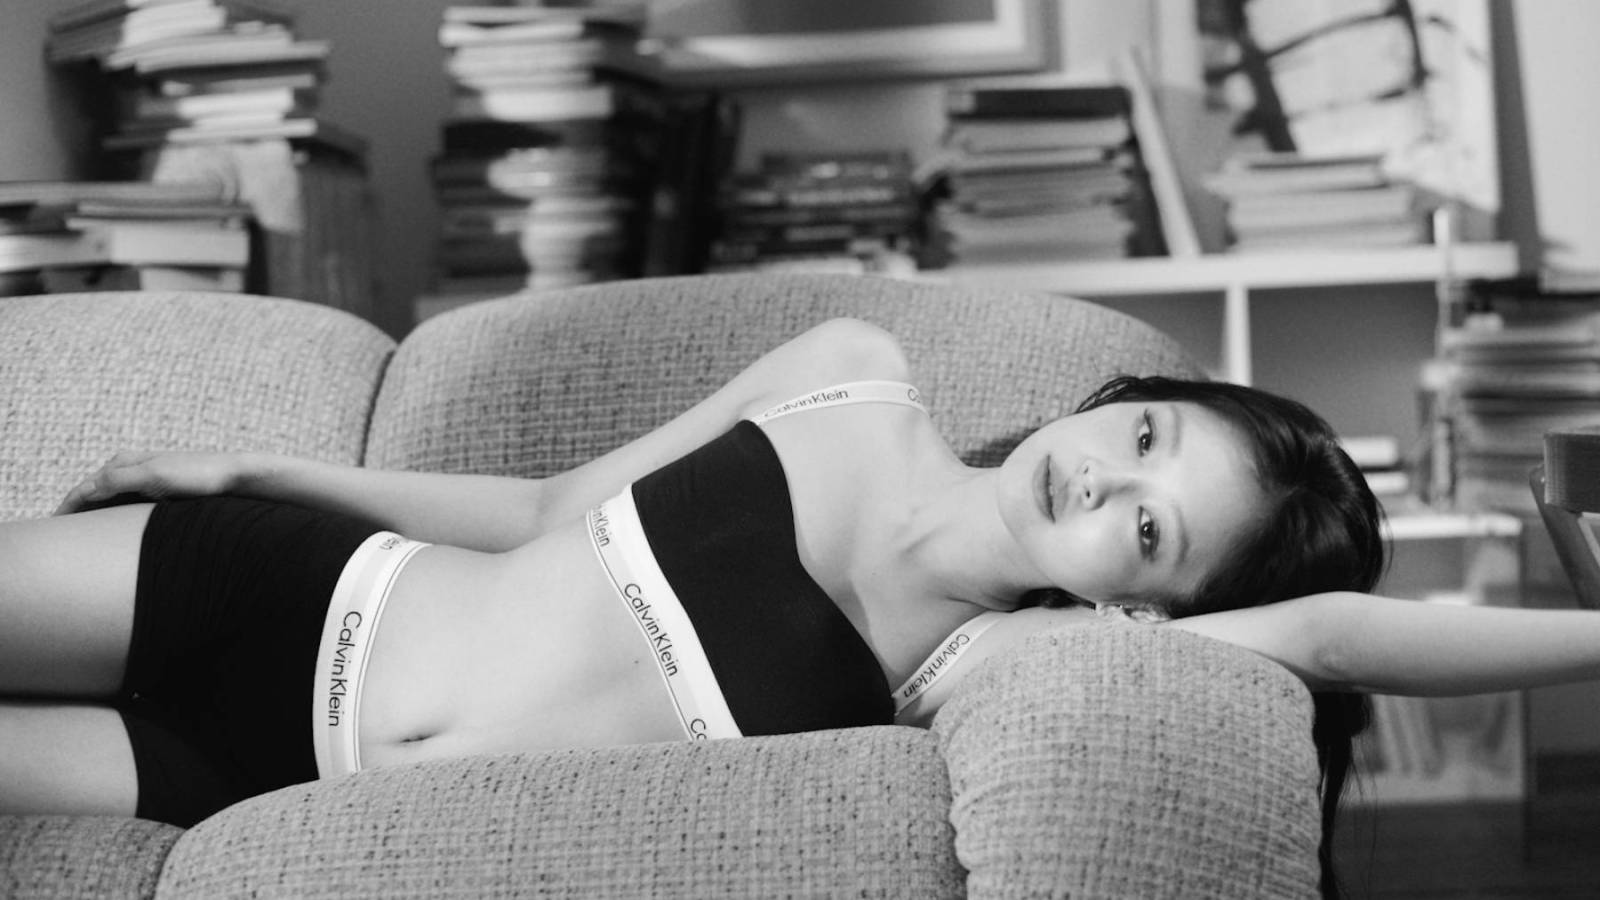 Watch Jennie Dance to the Ramones in New Calvin Klein Campaign Shoot